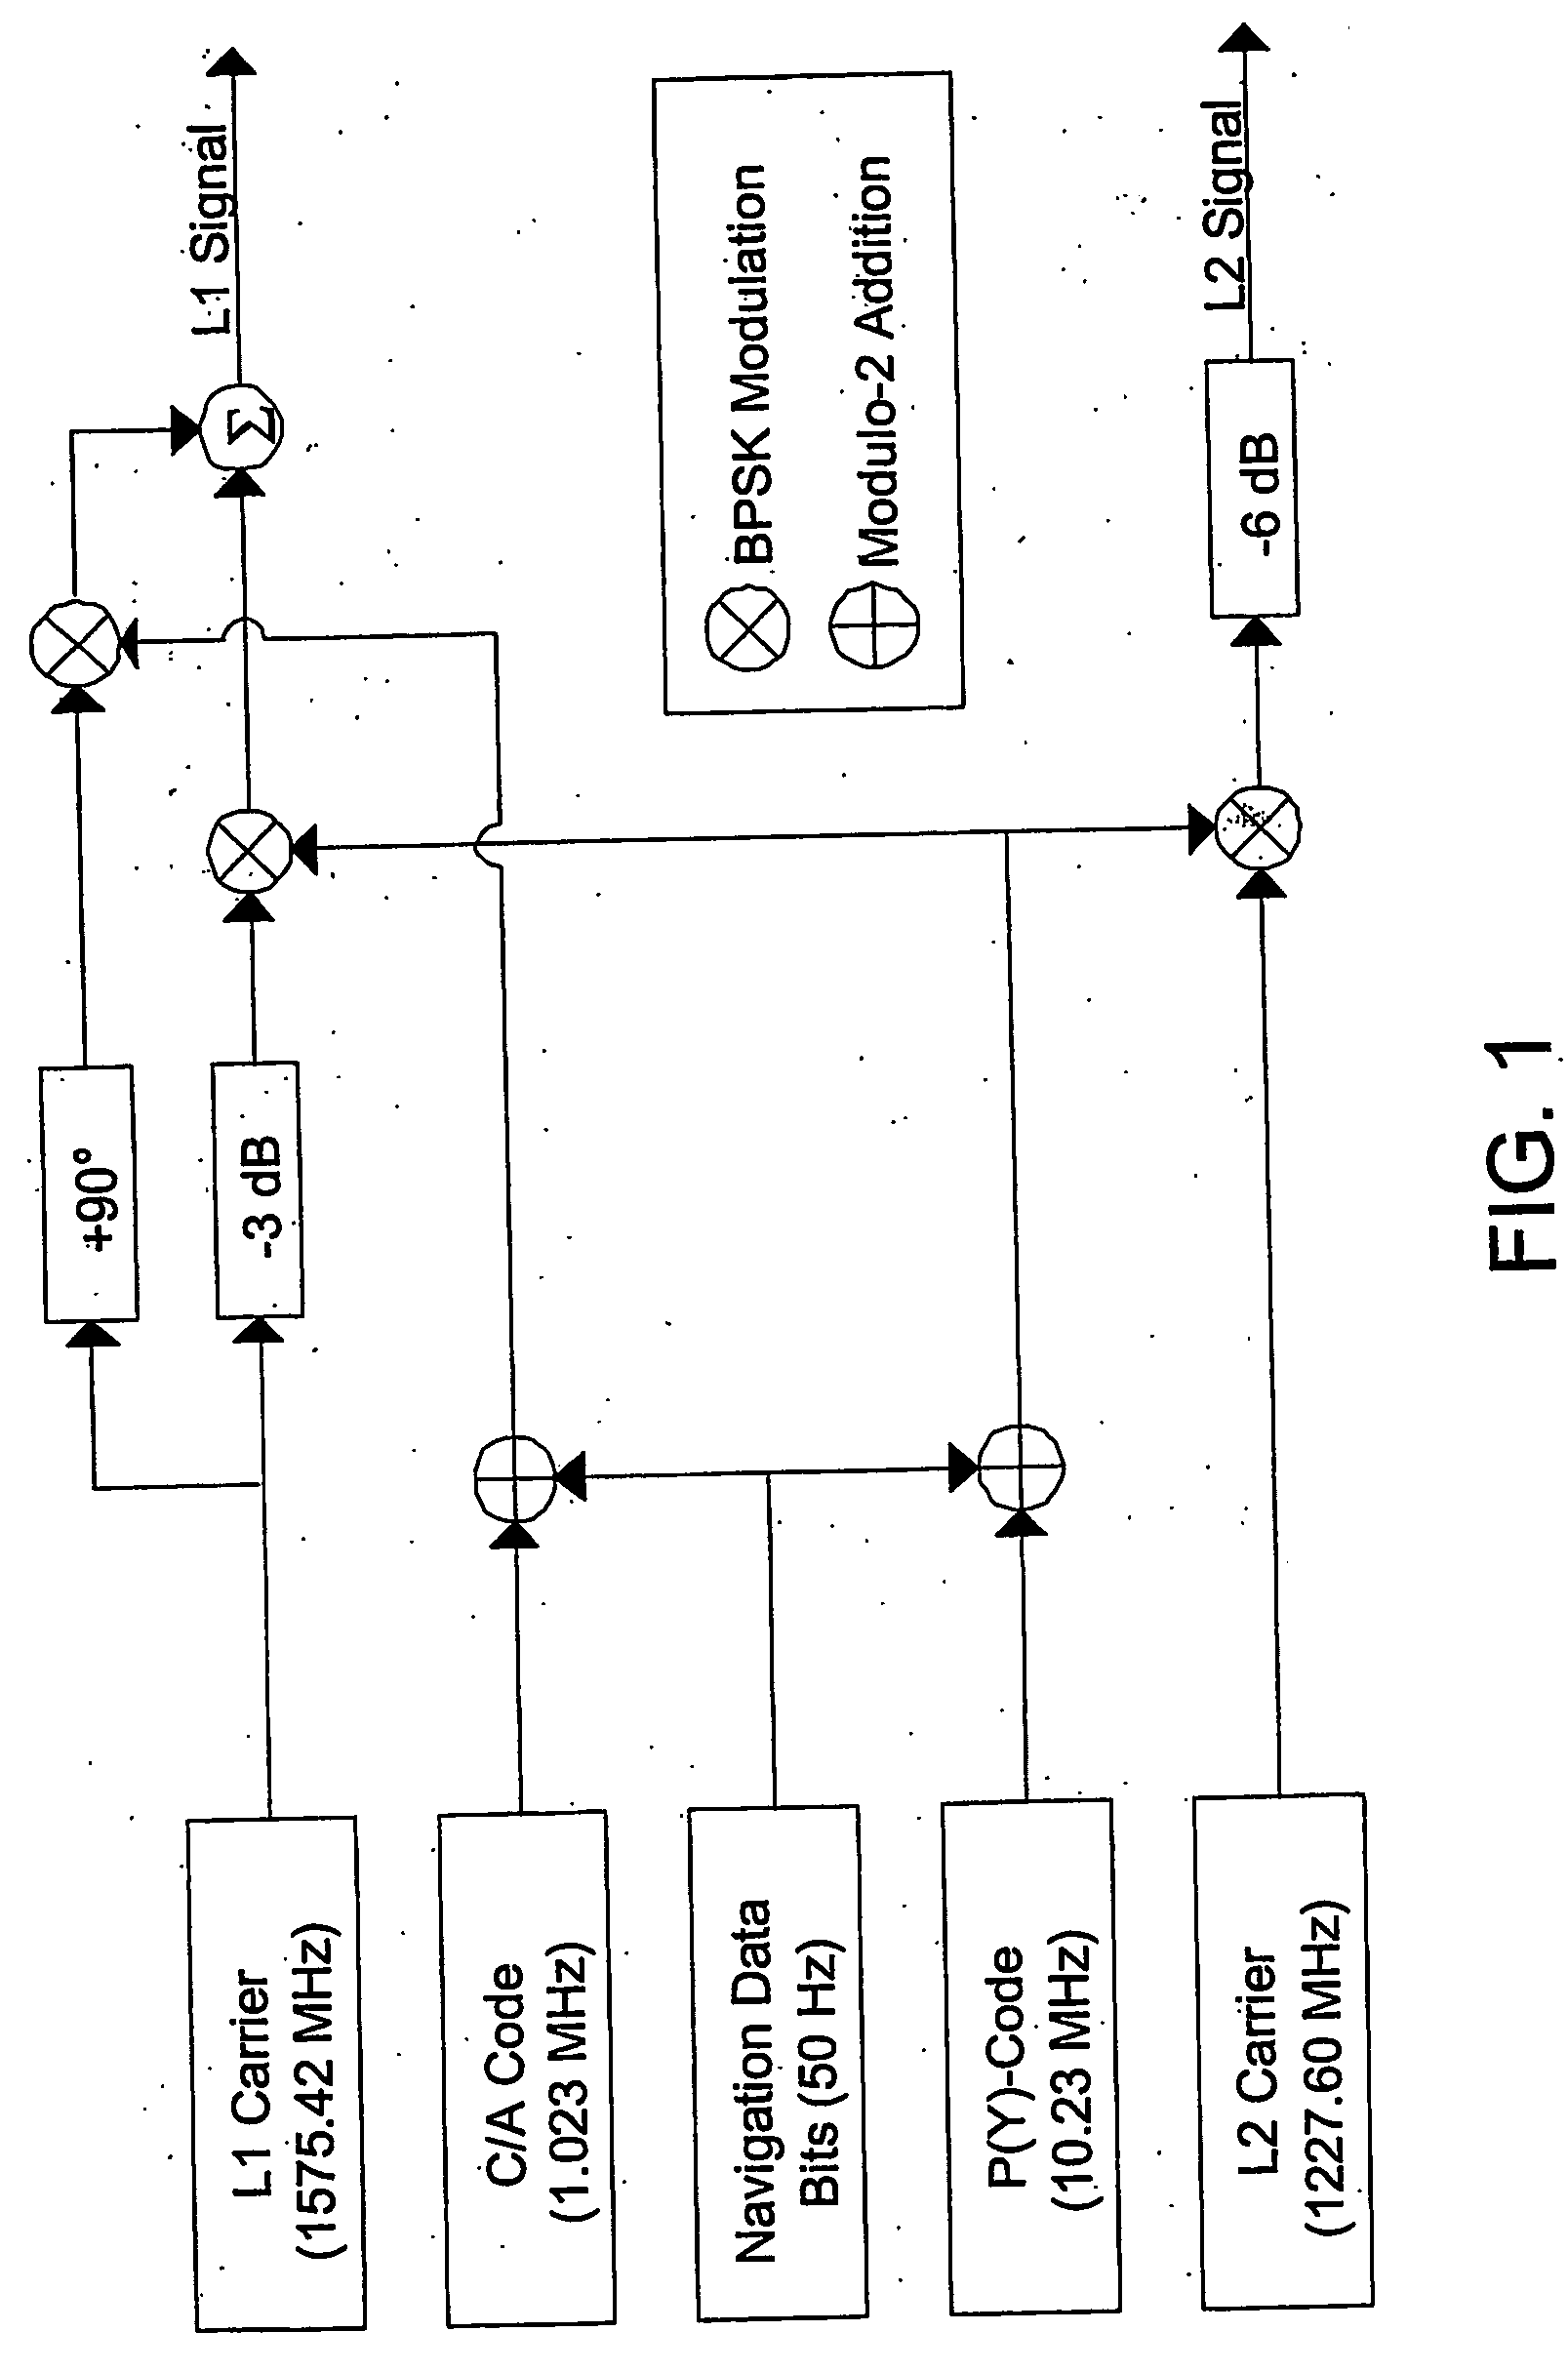 Performance of a receiver in interfering conditions